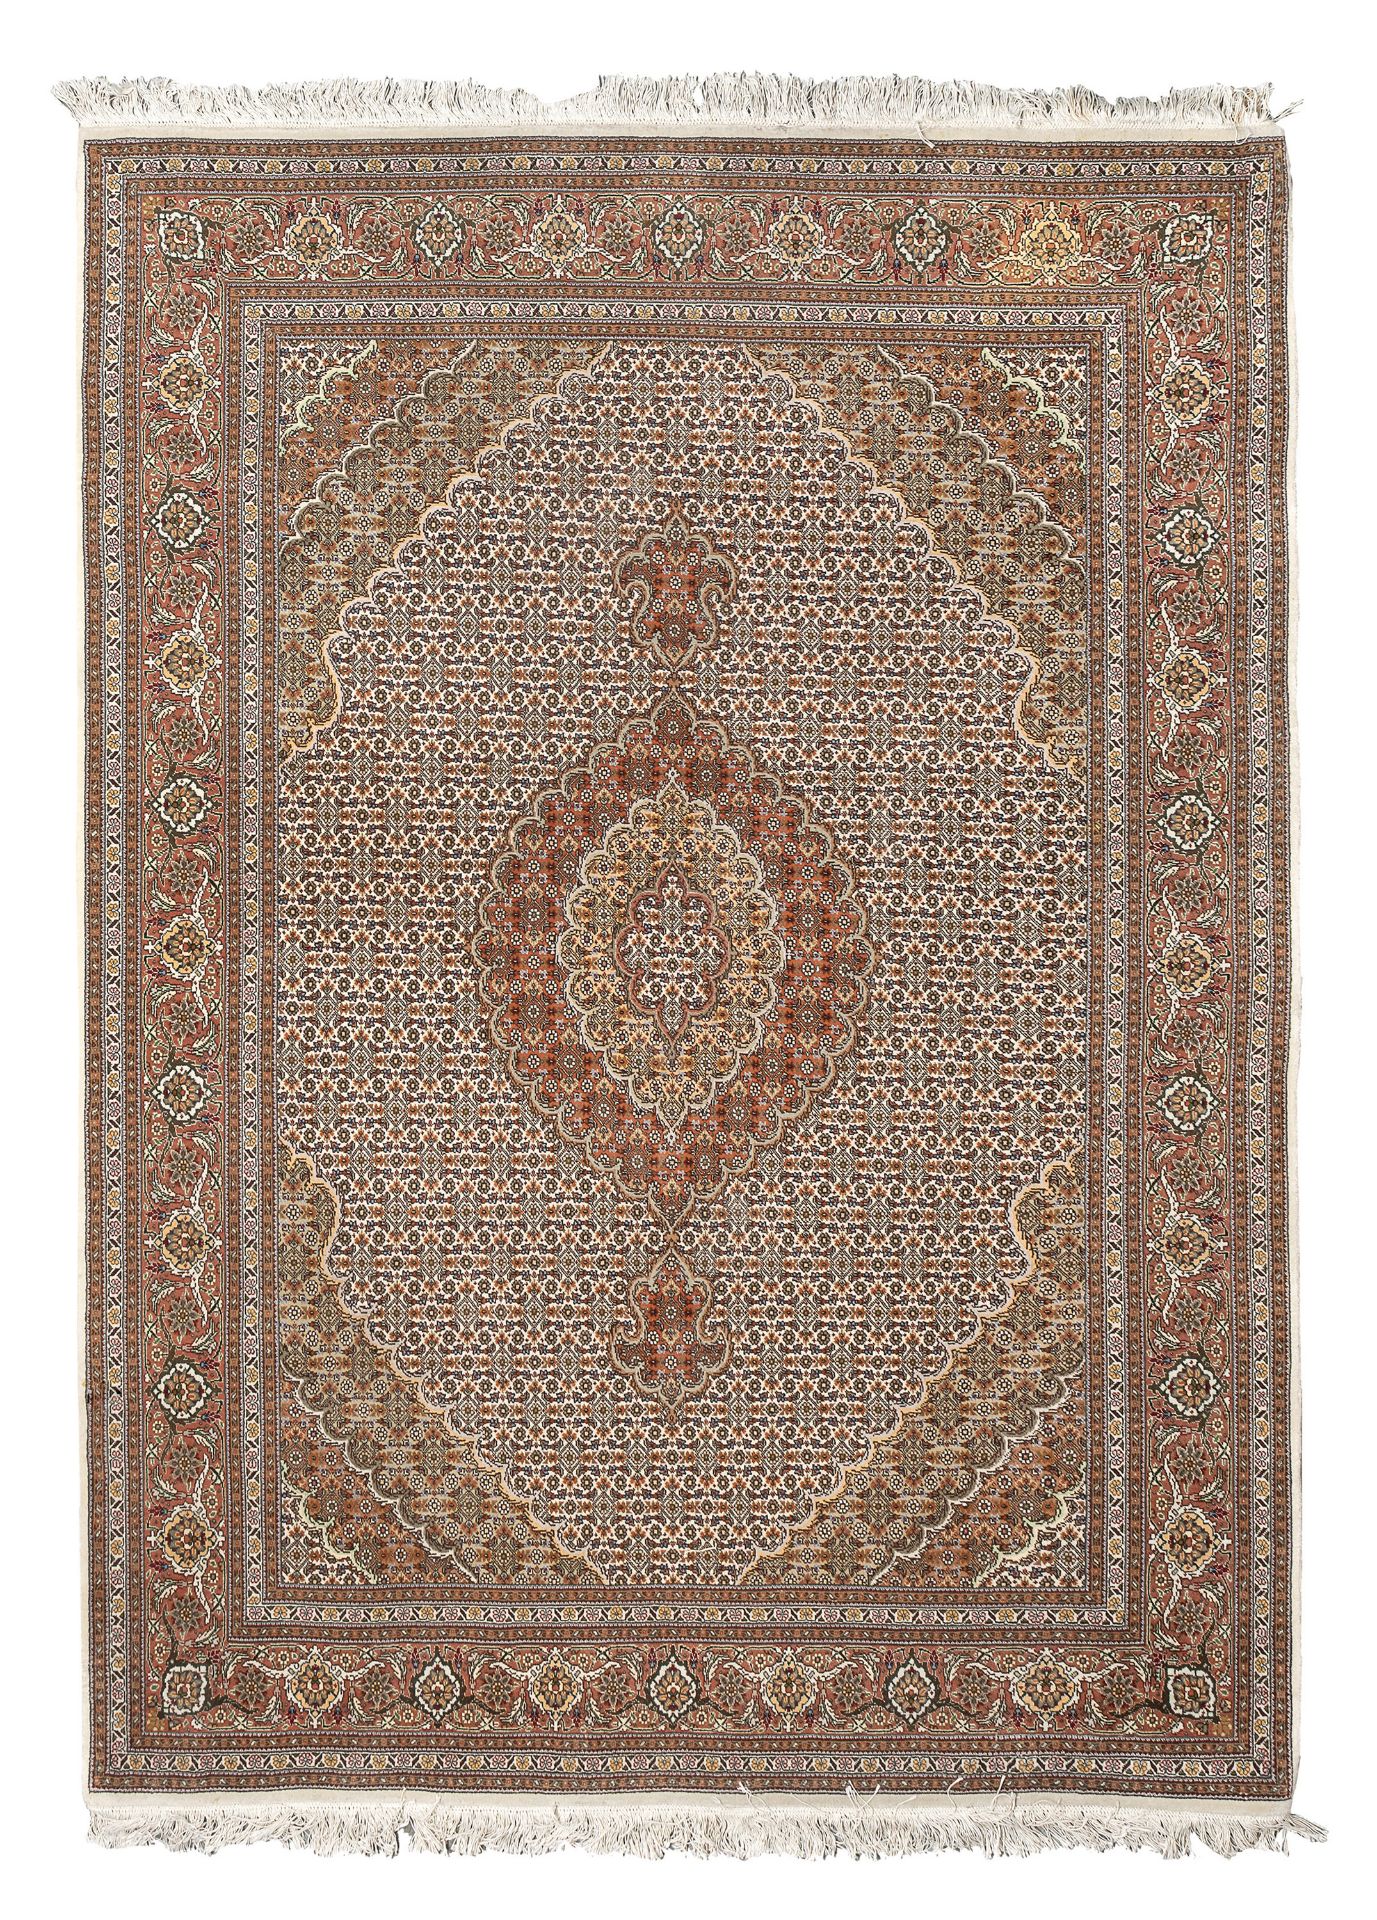 PERSIAN SERABEND CARPET FIRST HALF OF THE 20TH CENTURY